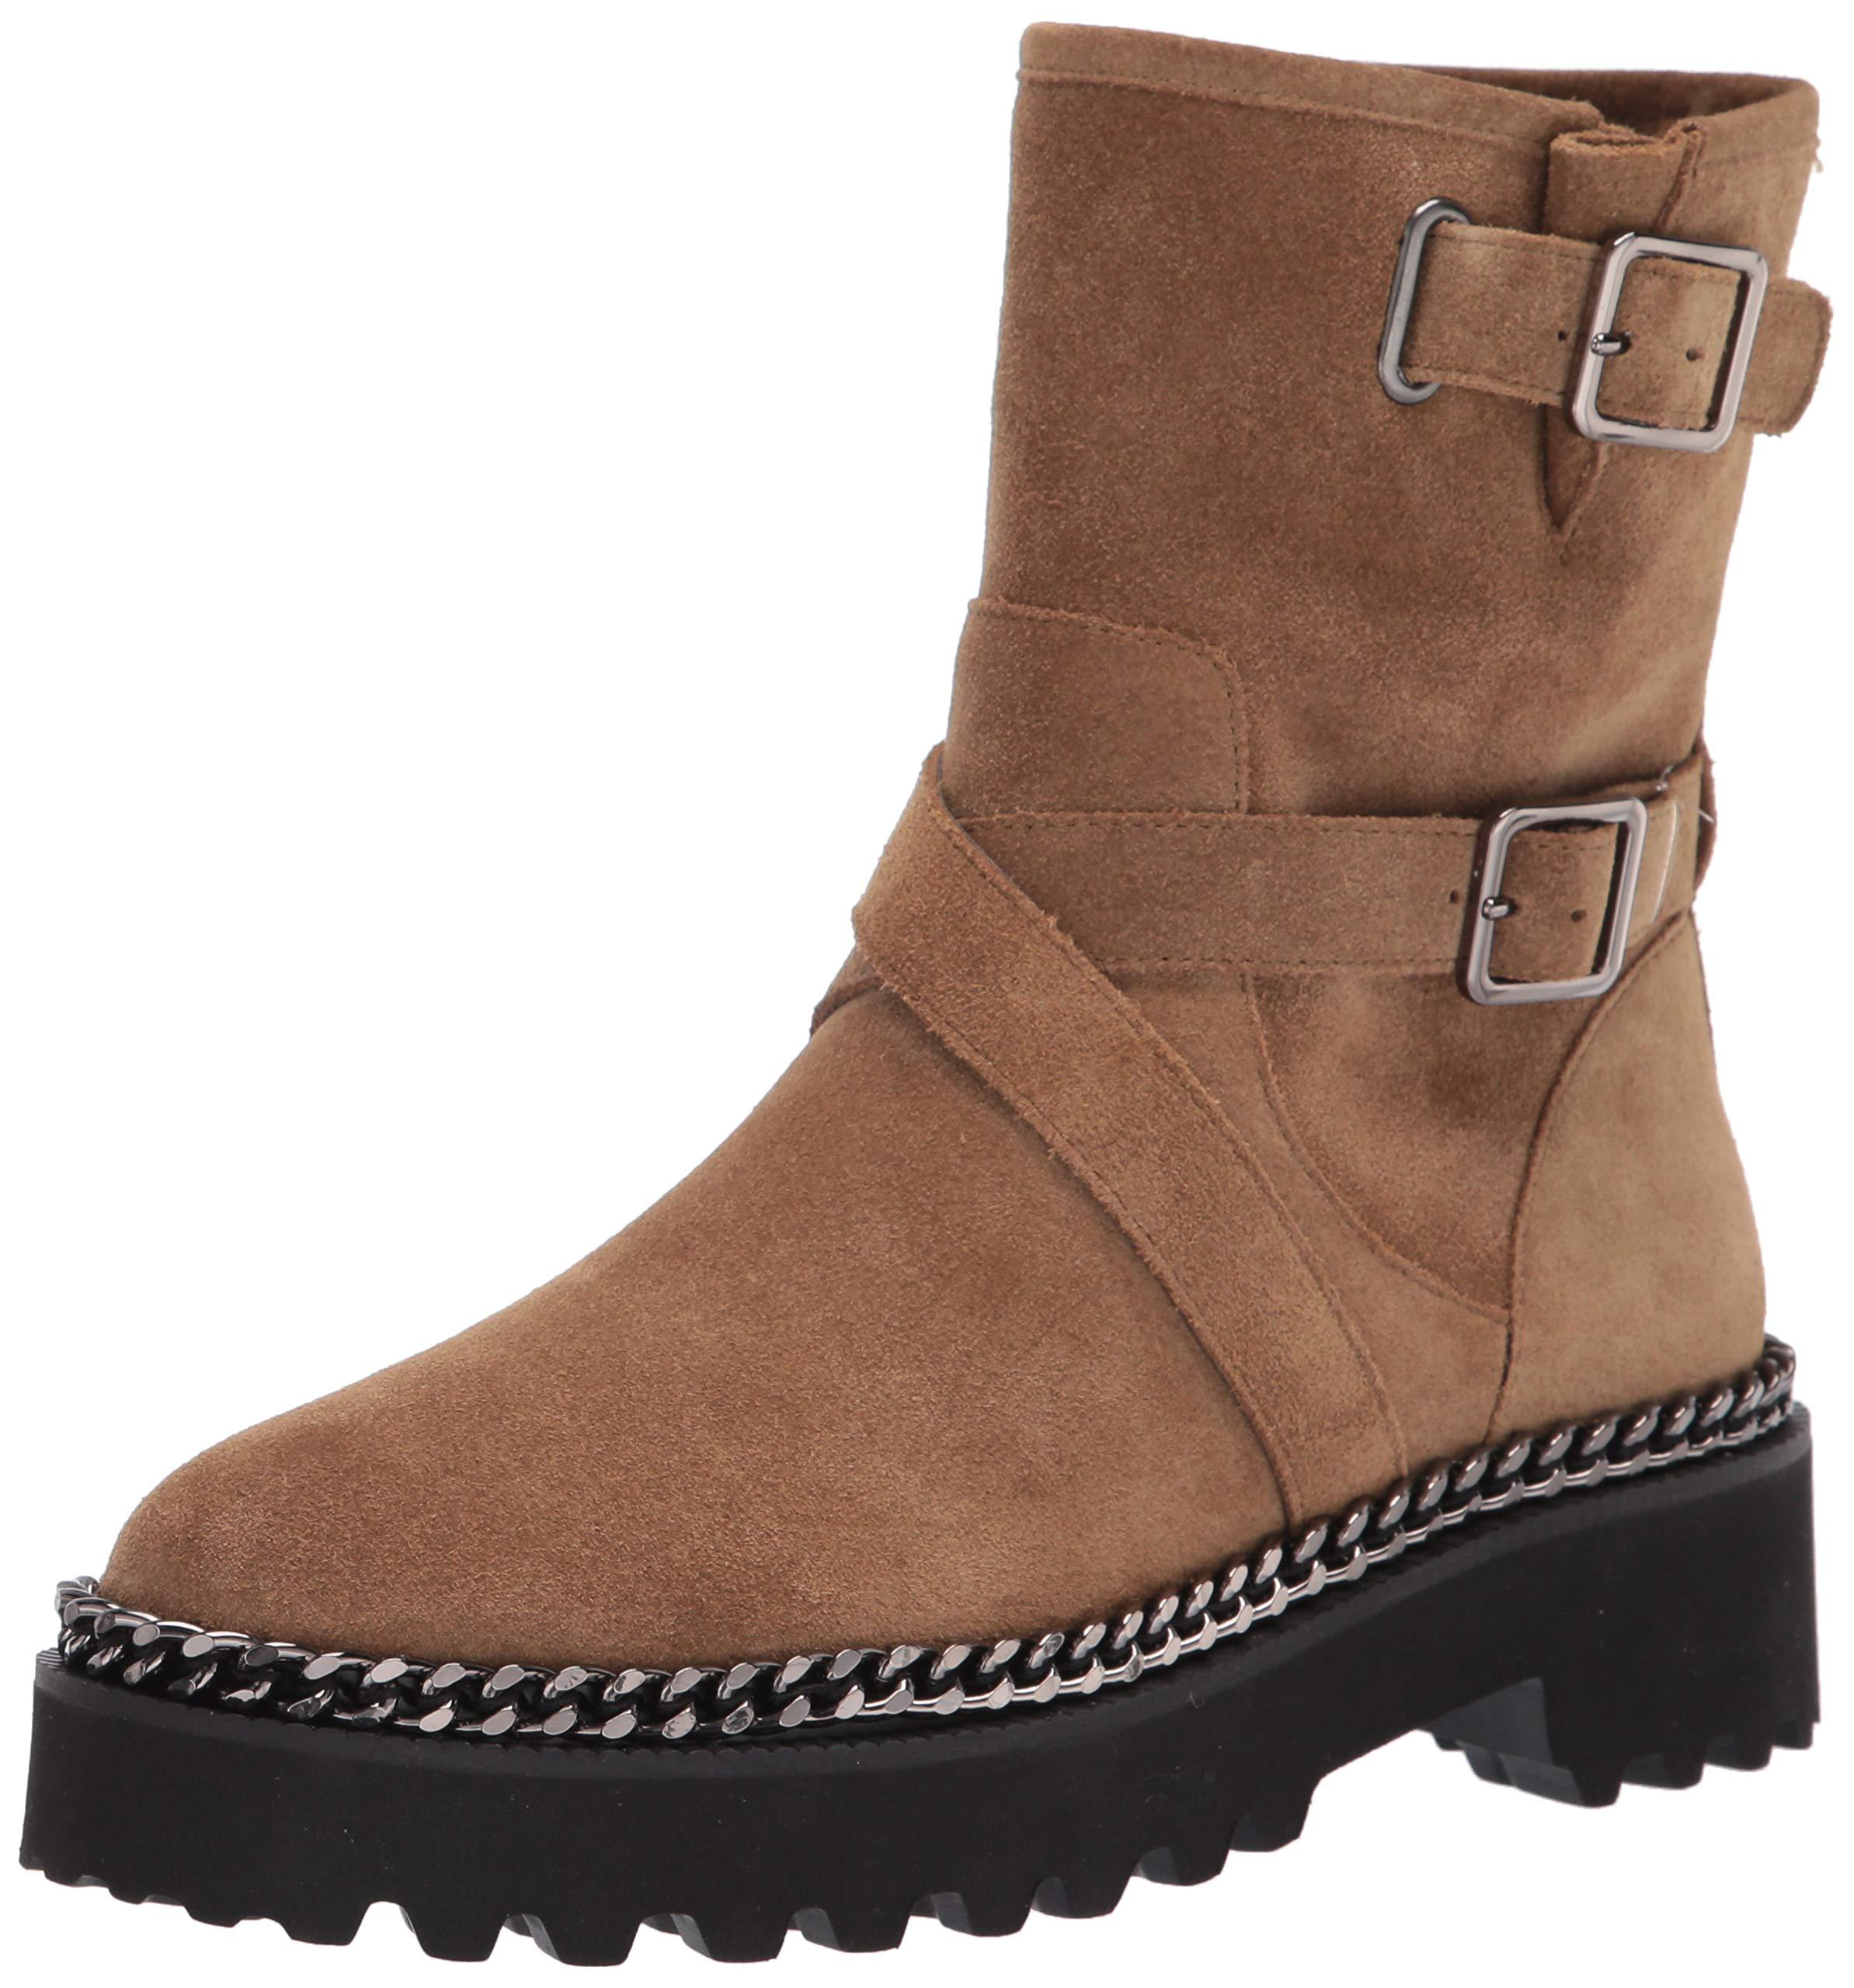 Vince Camuto Messtia Motorcycle Boot in Brown Lyst